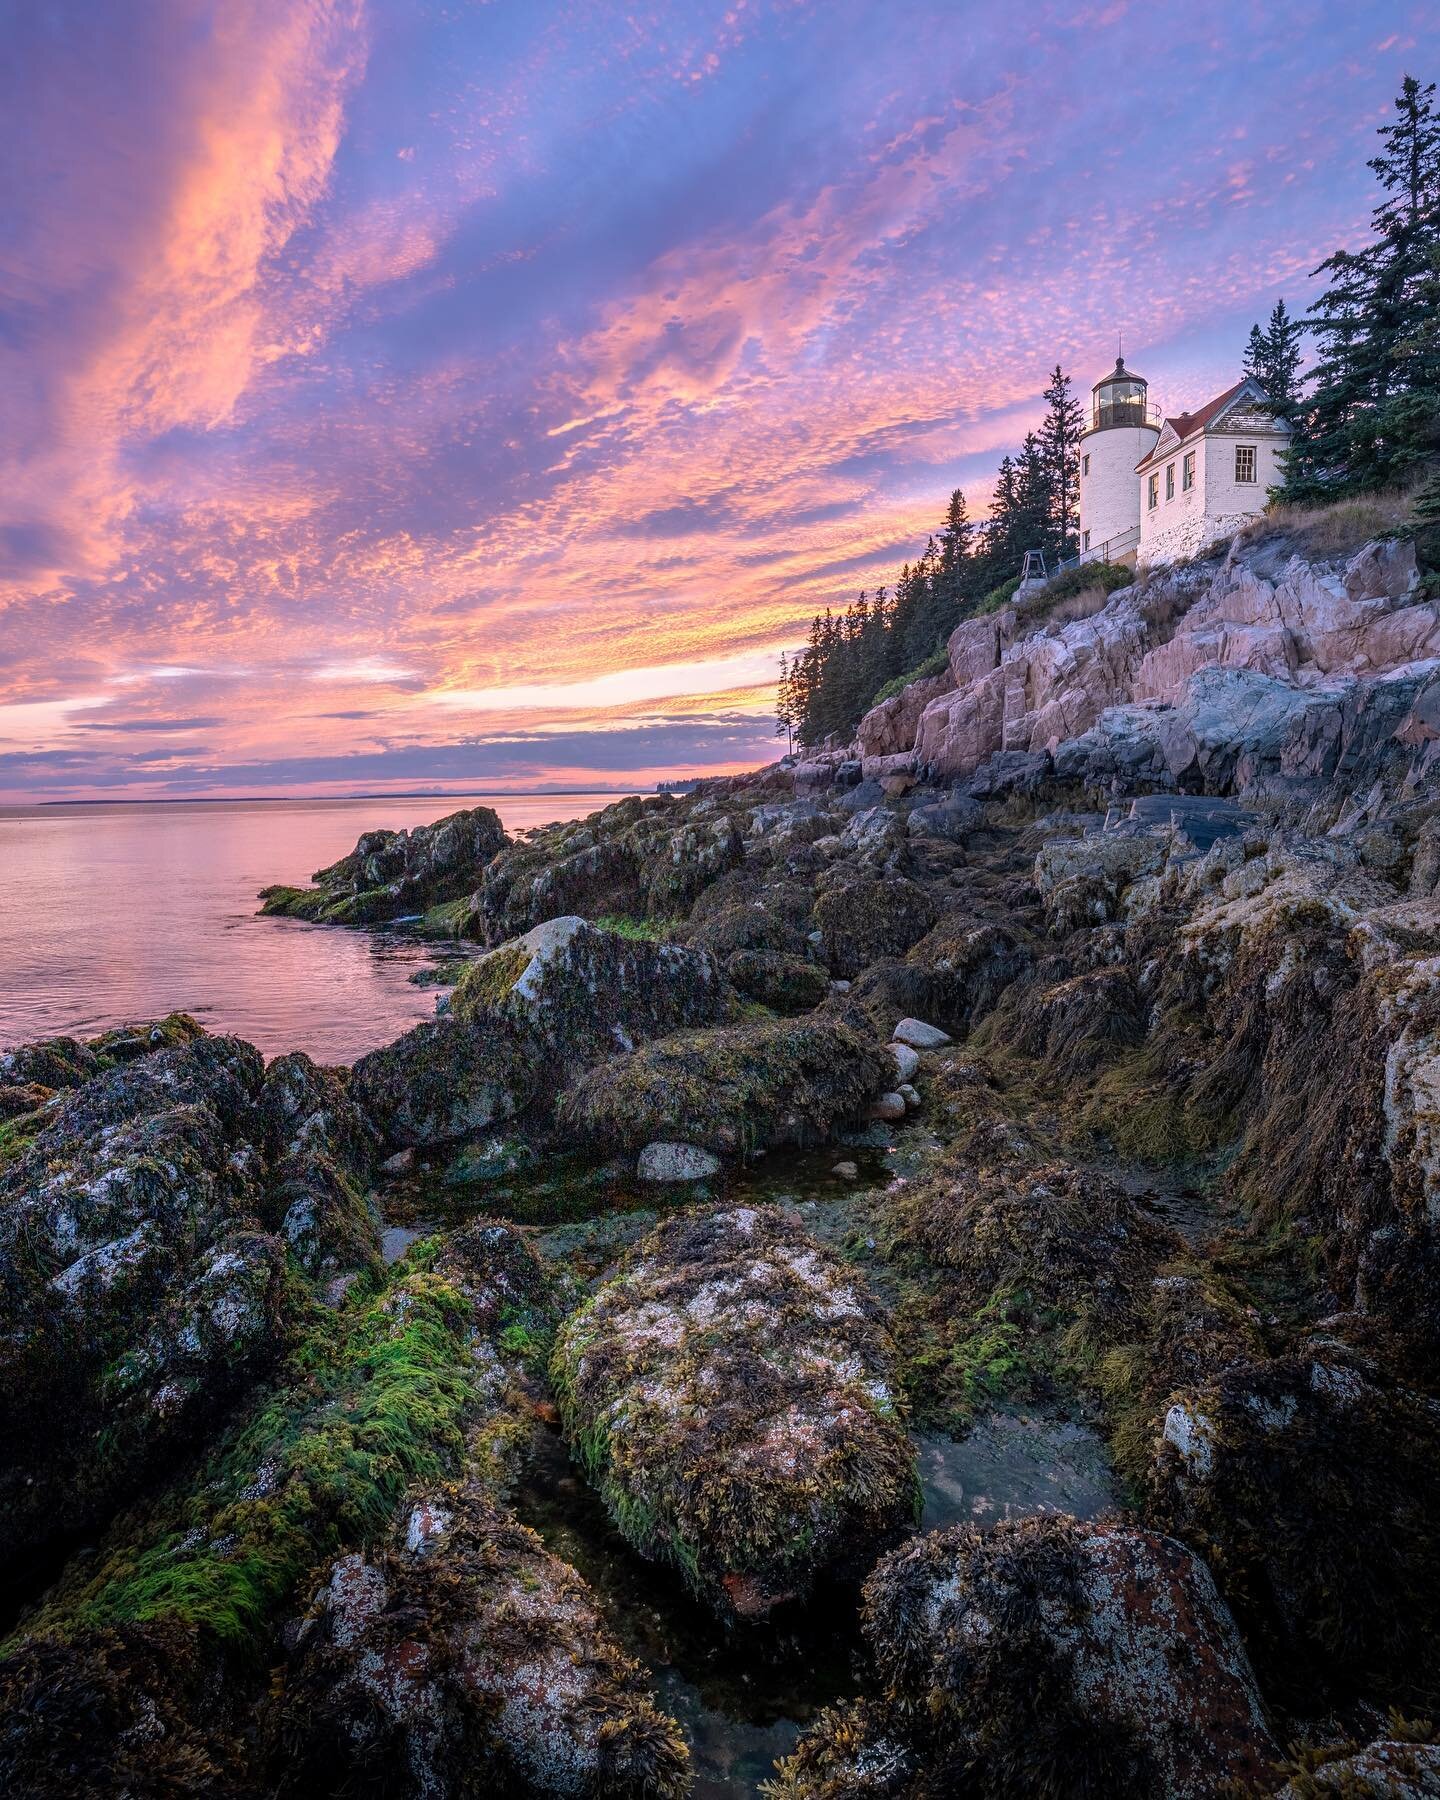 Bass Harbor Headlight at Sunset

Met some other photographers and soaked it all in during my first evening in Acadia! Wasn&rsquo;t even expecting to shoot but brought my camera along anyways and was greeted with this burner 🤝